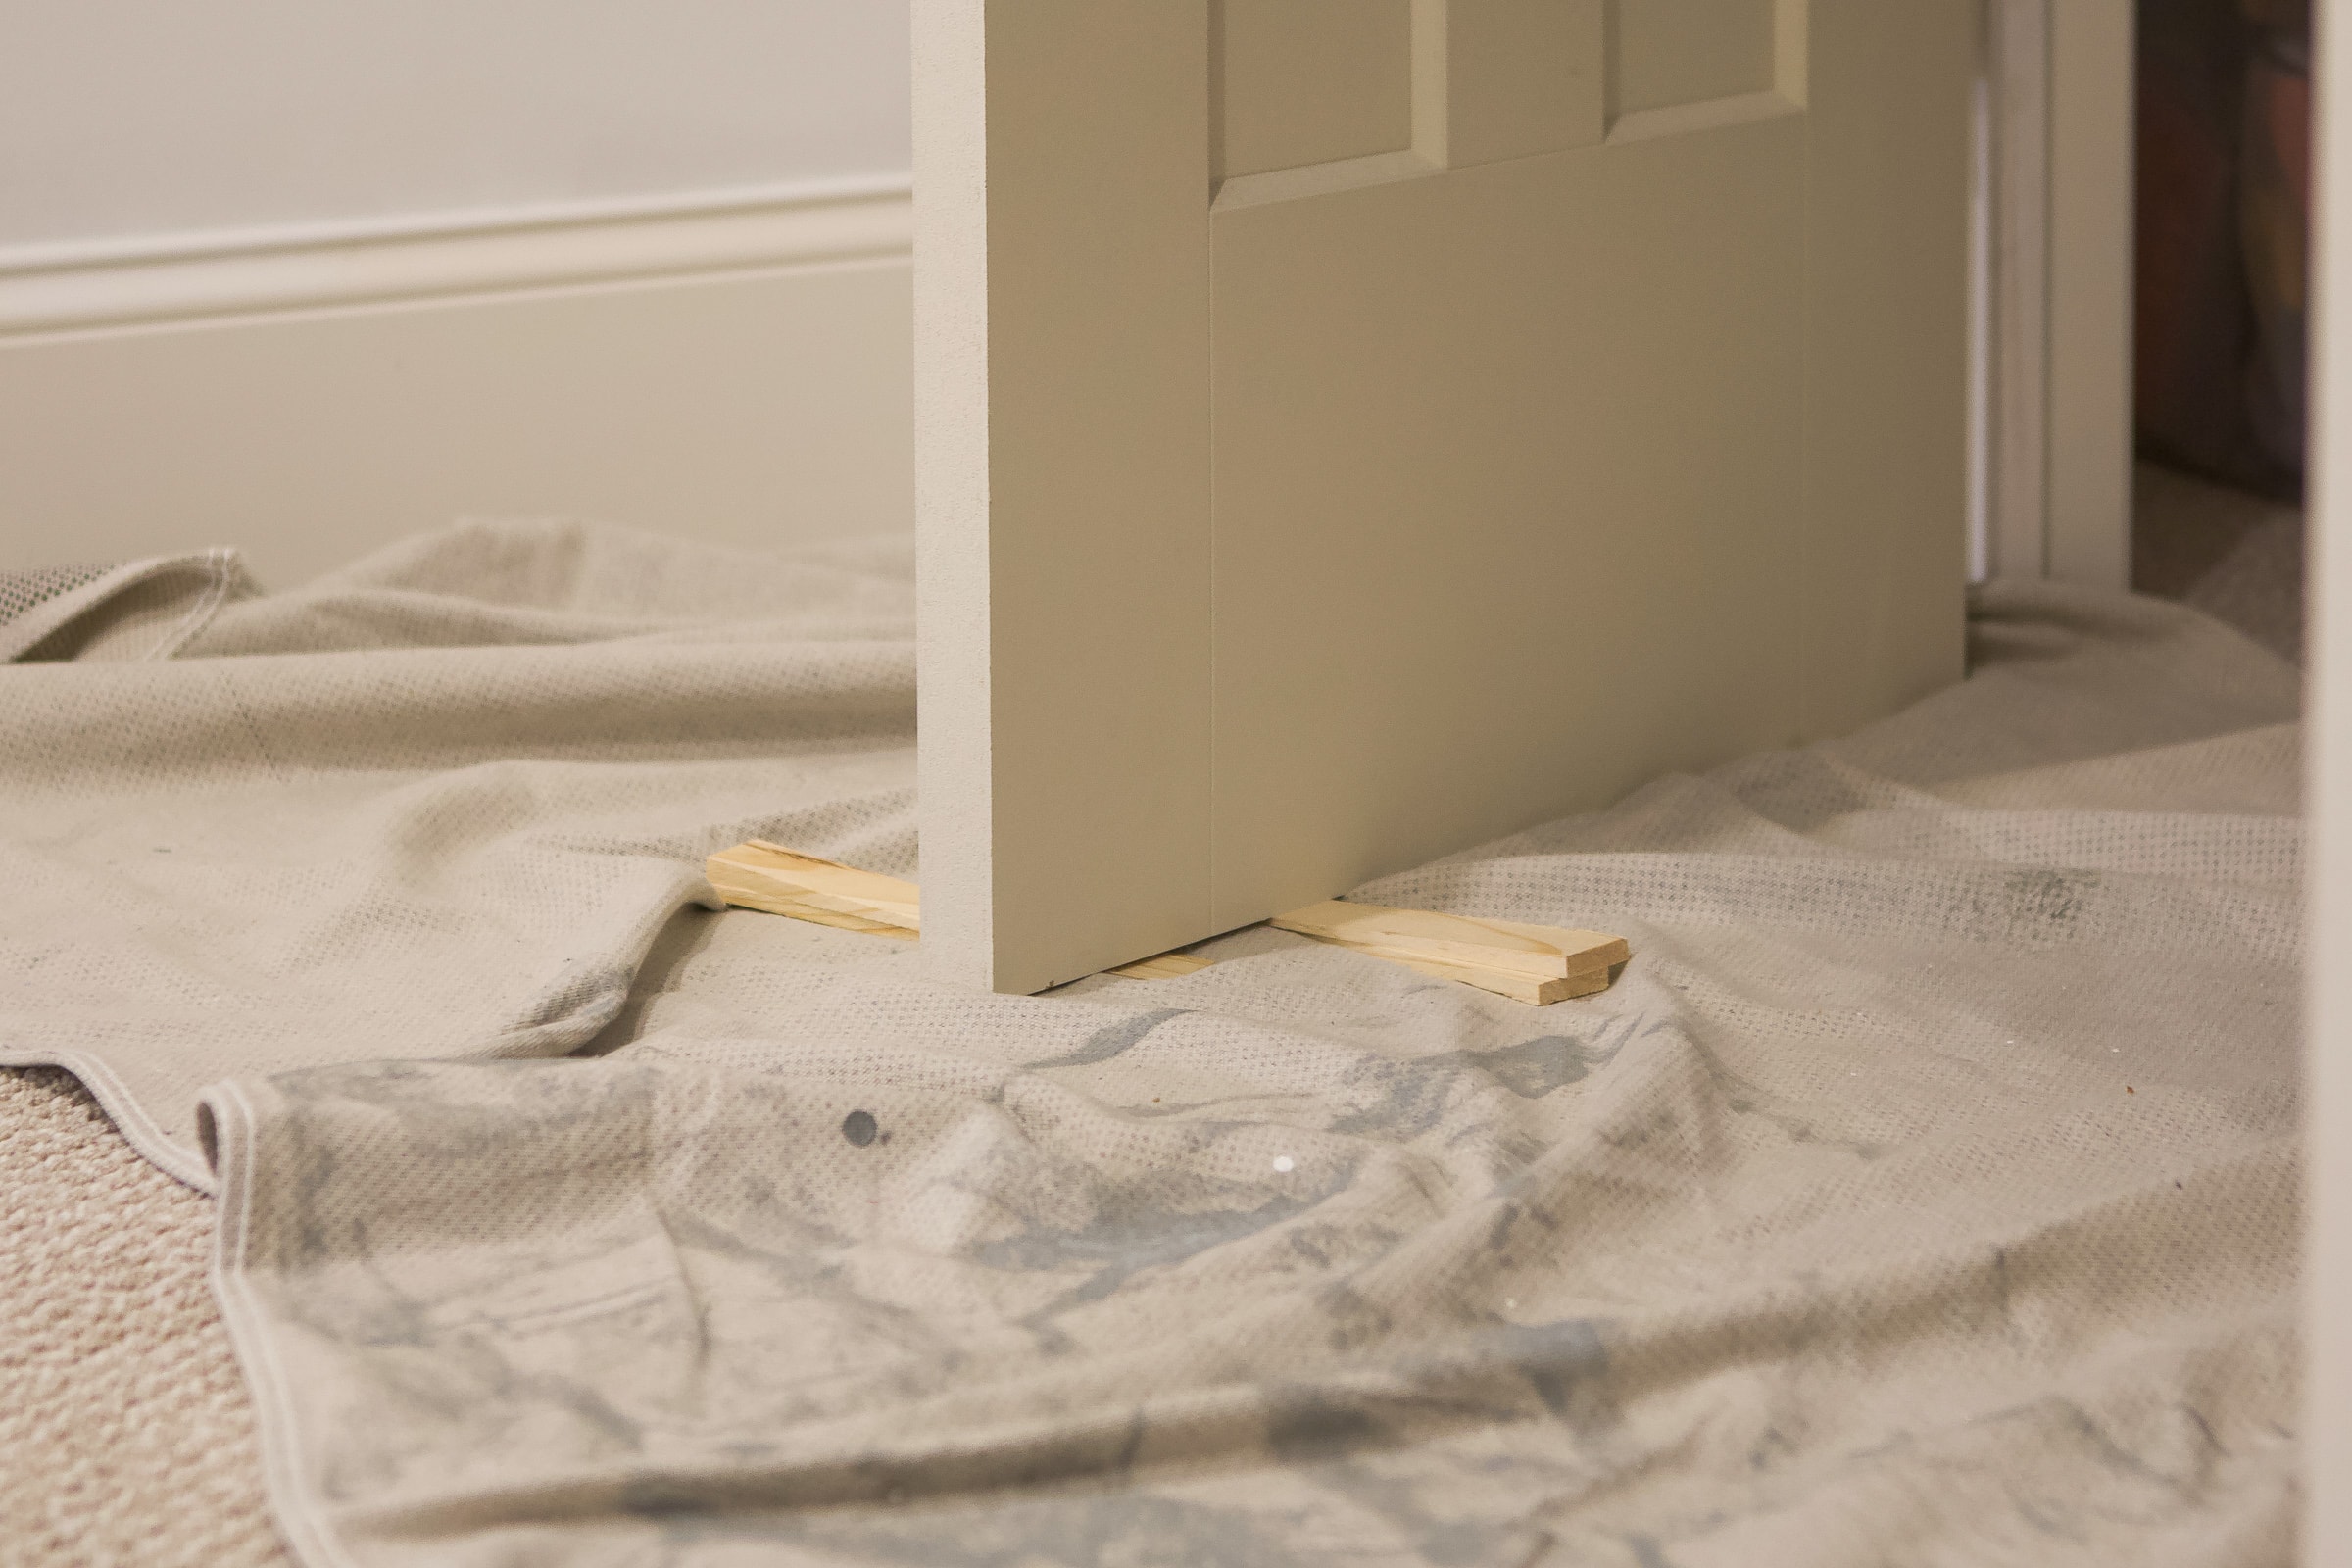 Use wood shims to keep your door in place while you paint